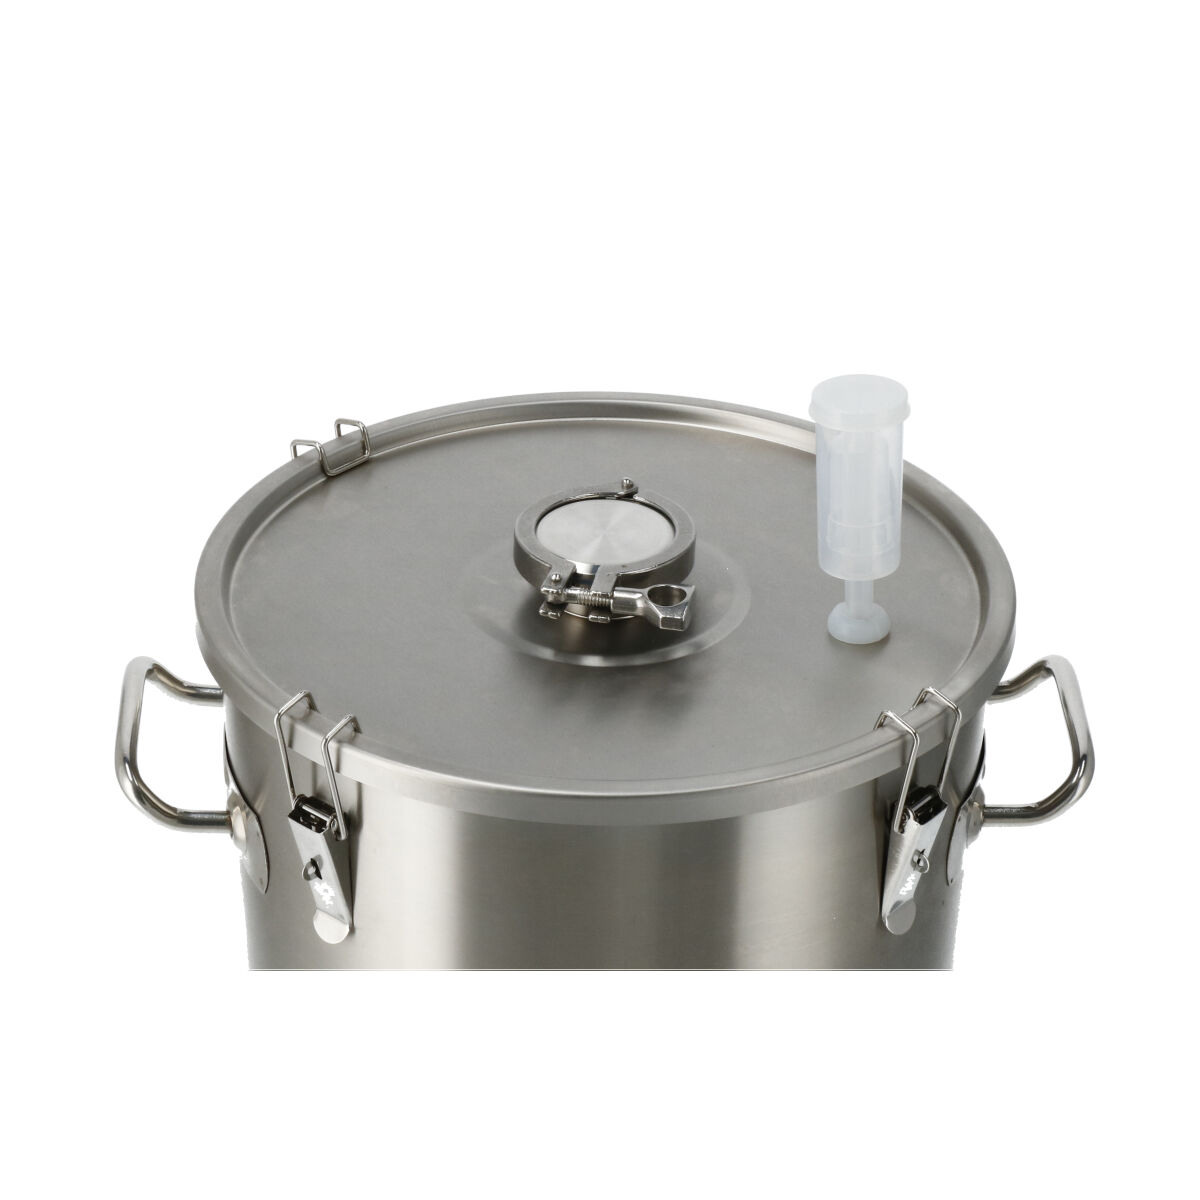 Easybrew Fermenting Bucket 30 with Dry-Hop Lid